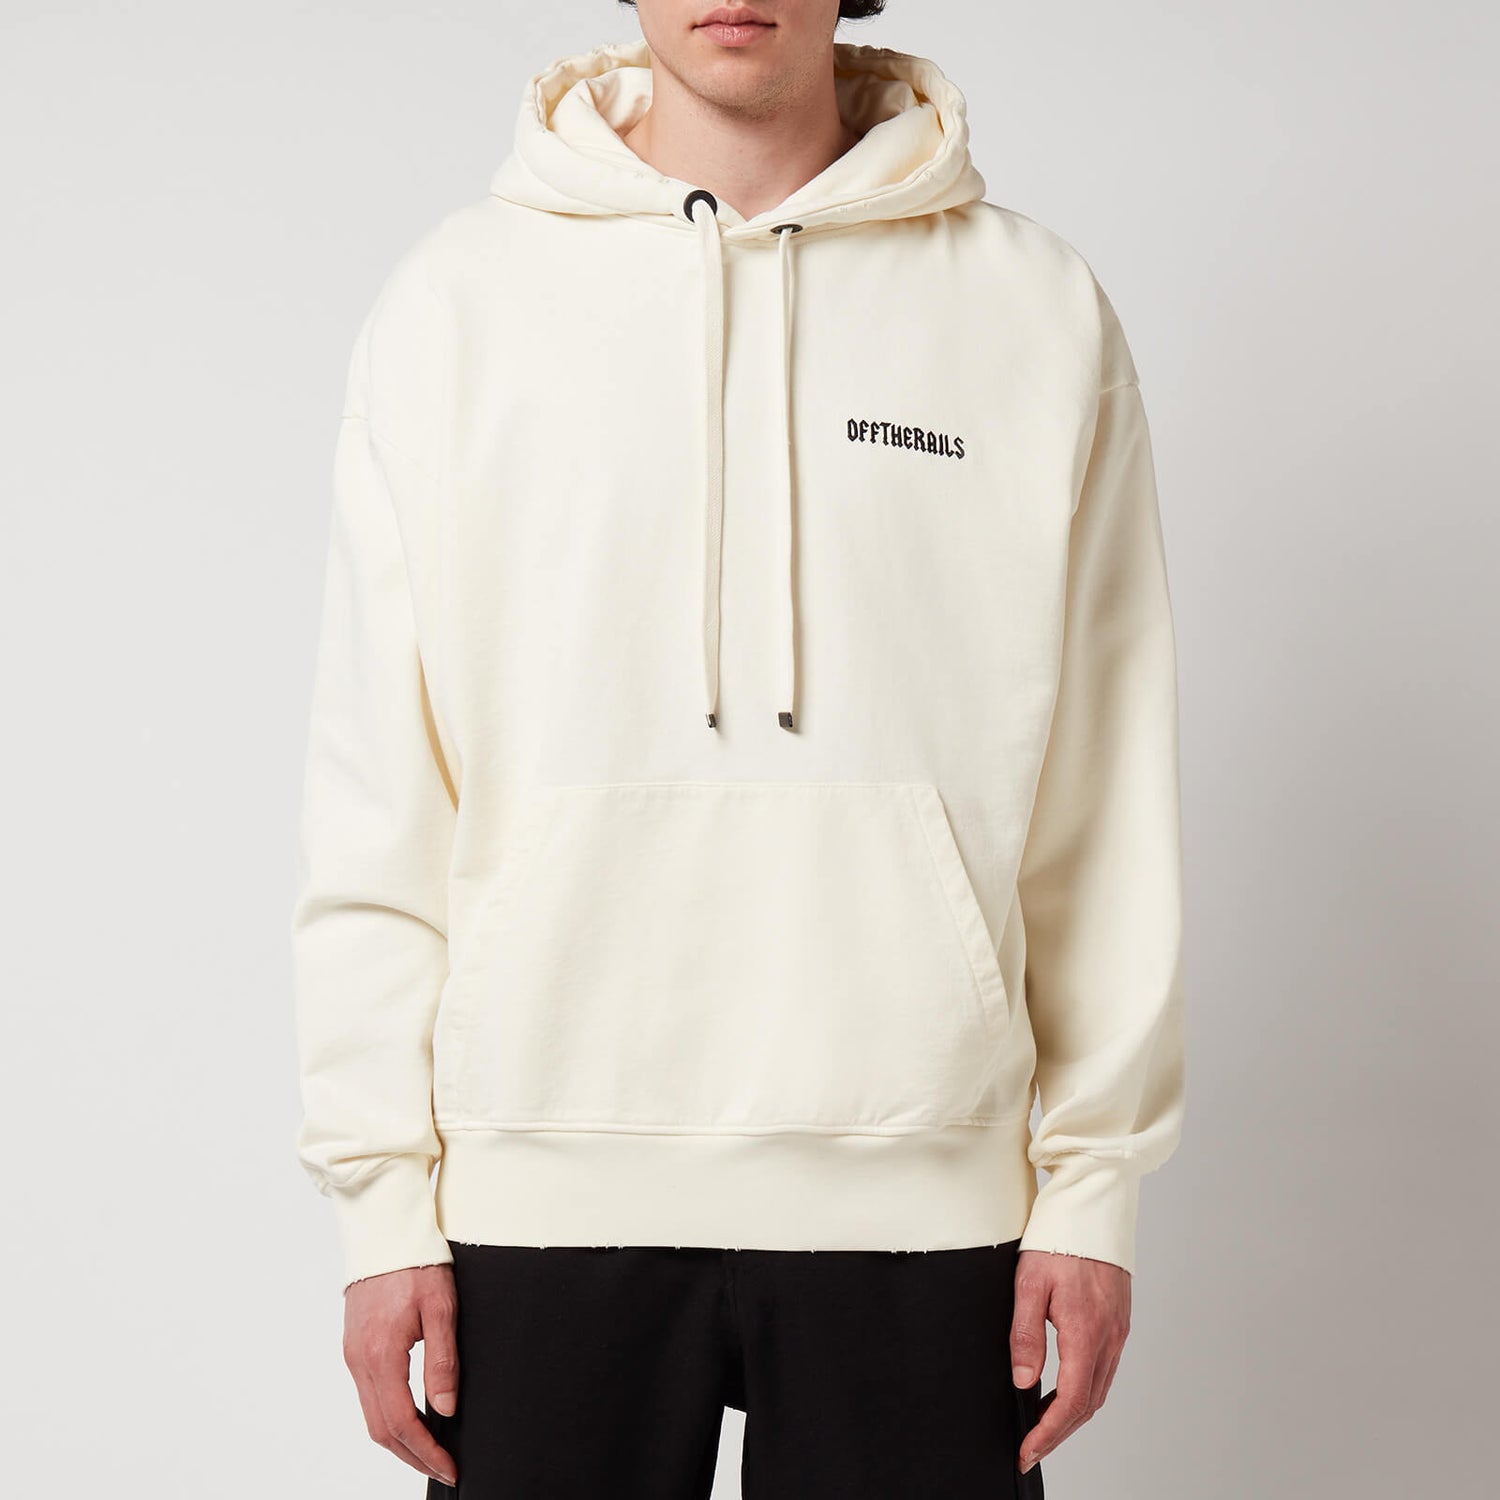 Off The Rails Men's Snaked Hoodie - White - S